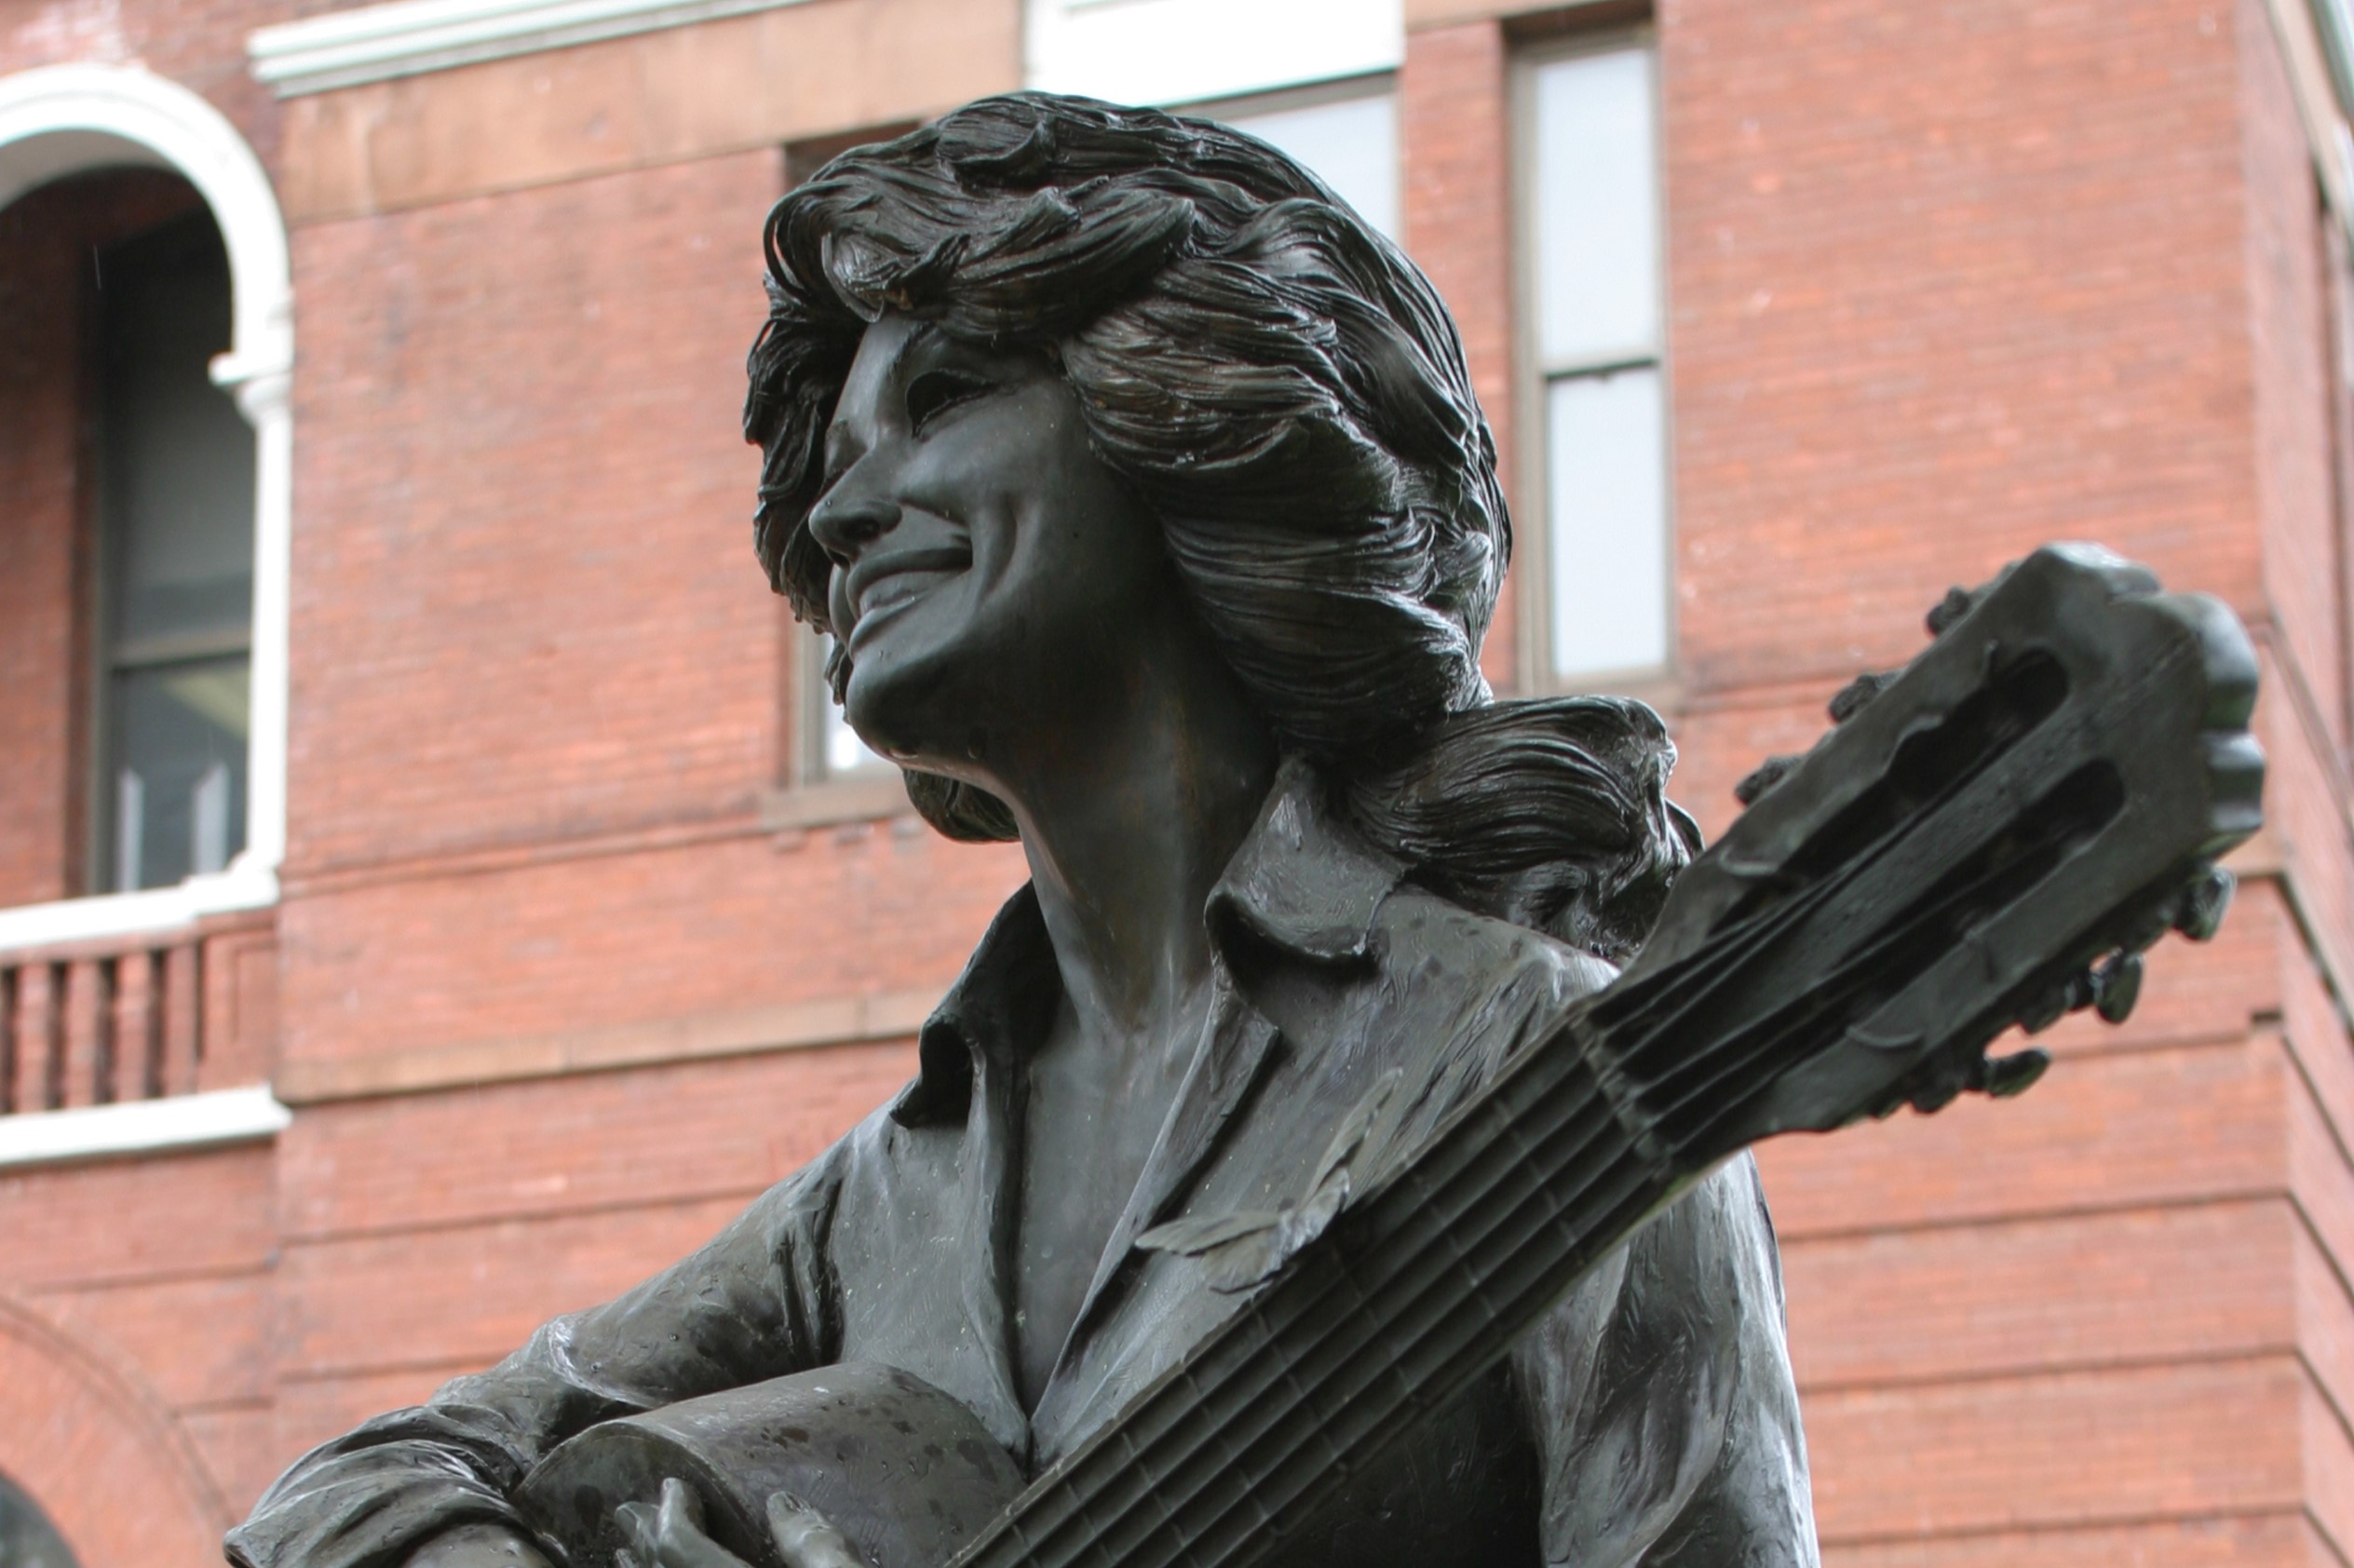 A statue of Dolly Parton holding a guitar outside of a brick building.